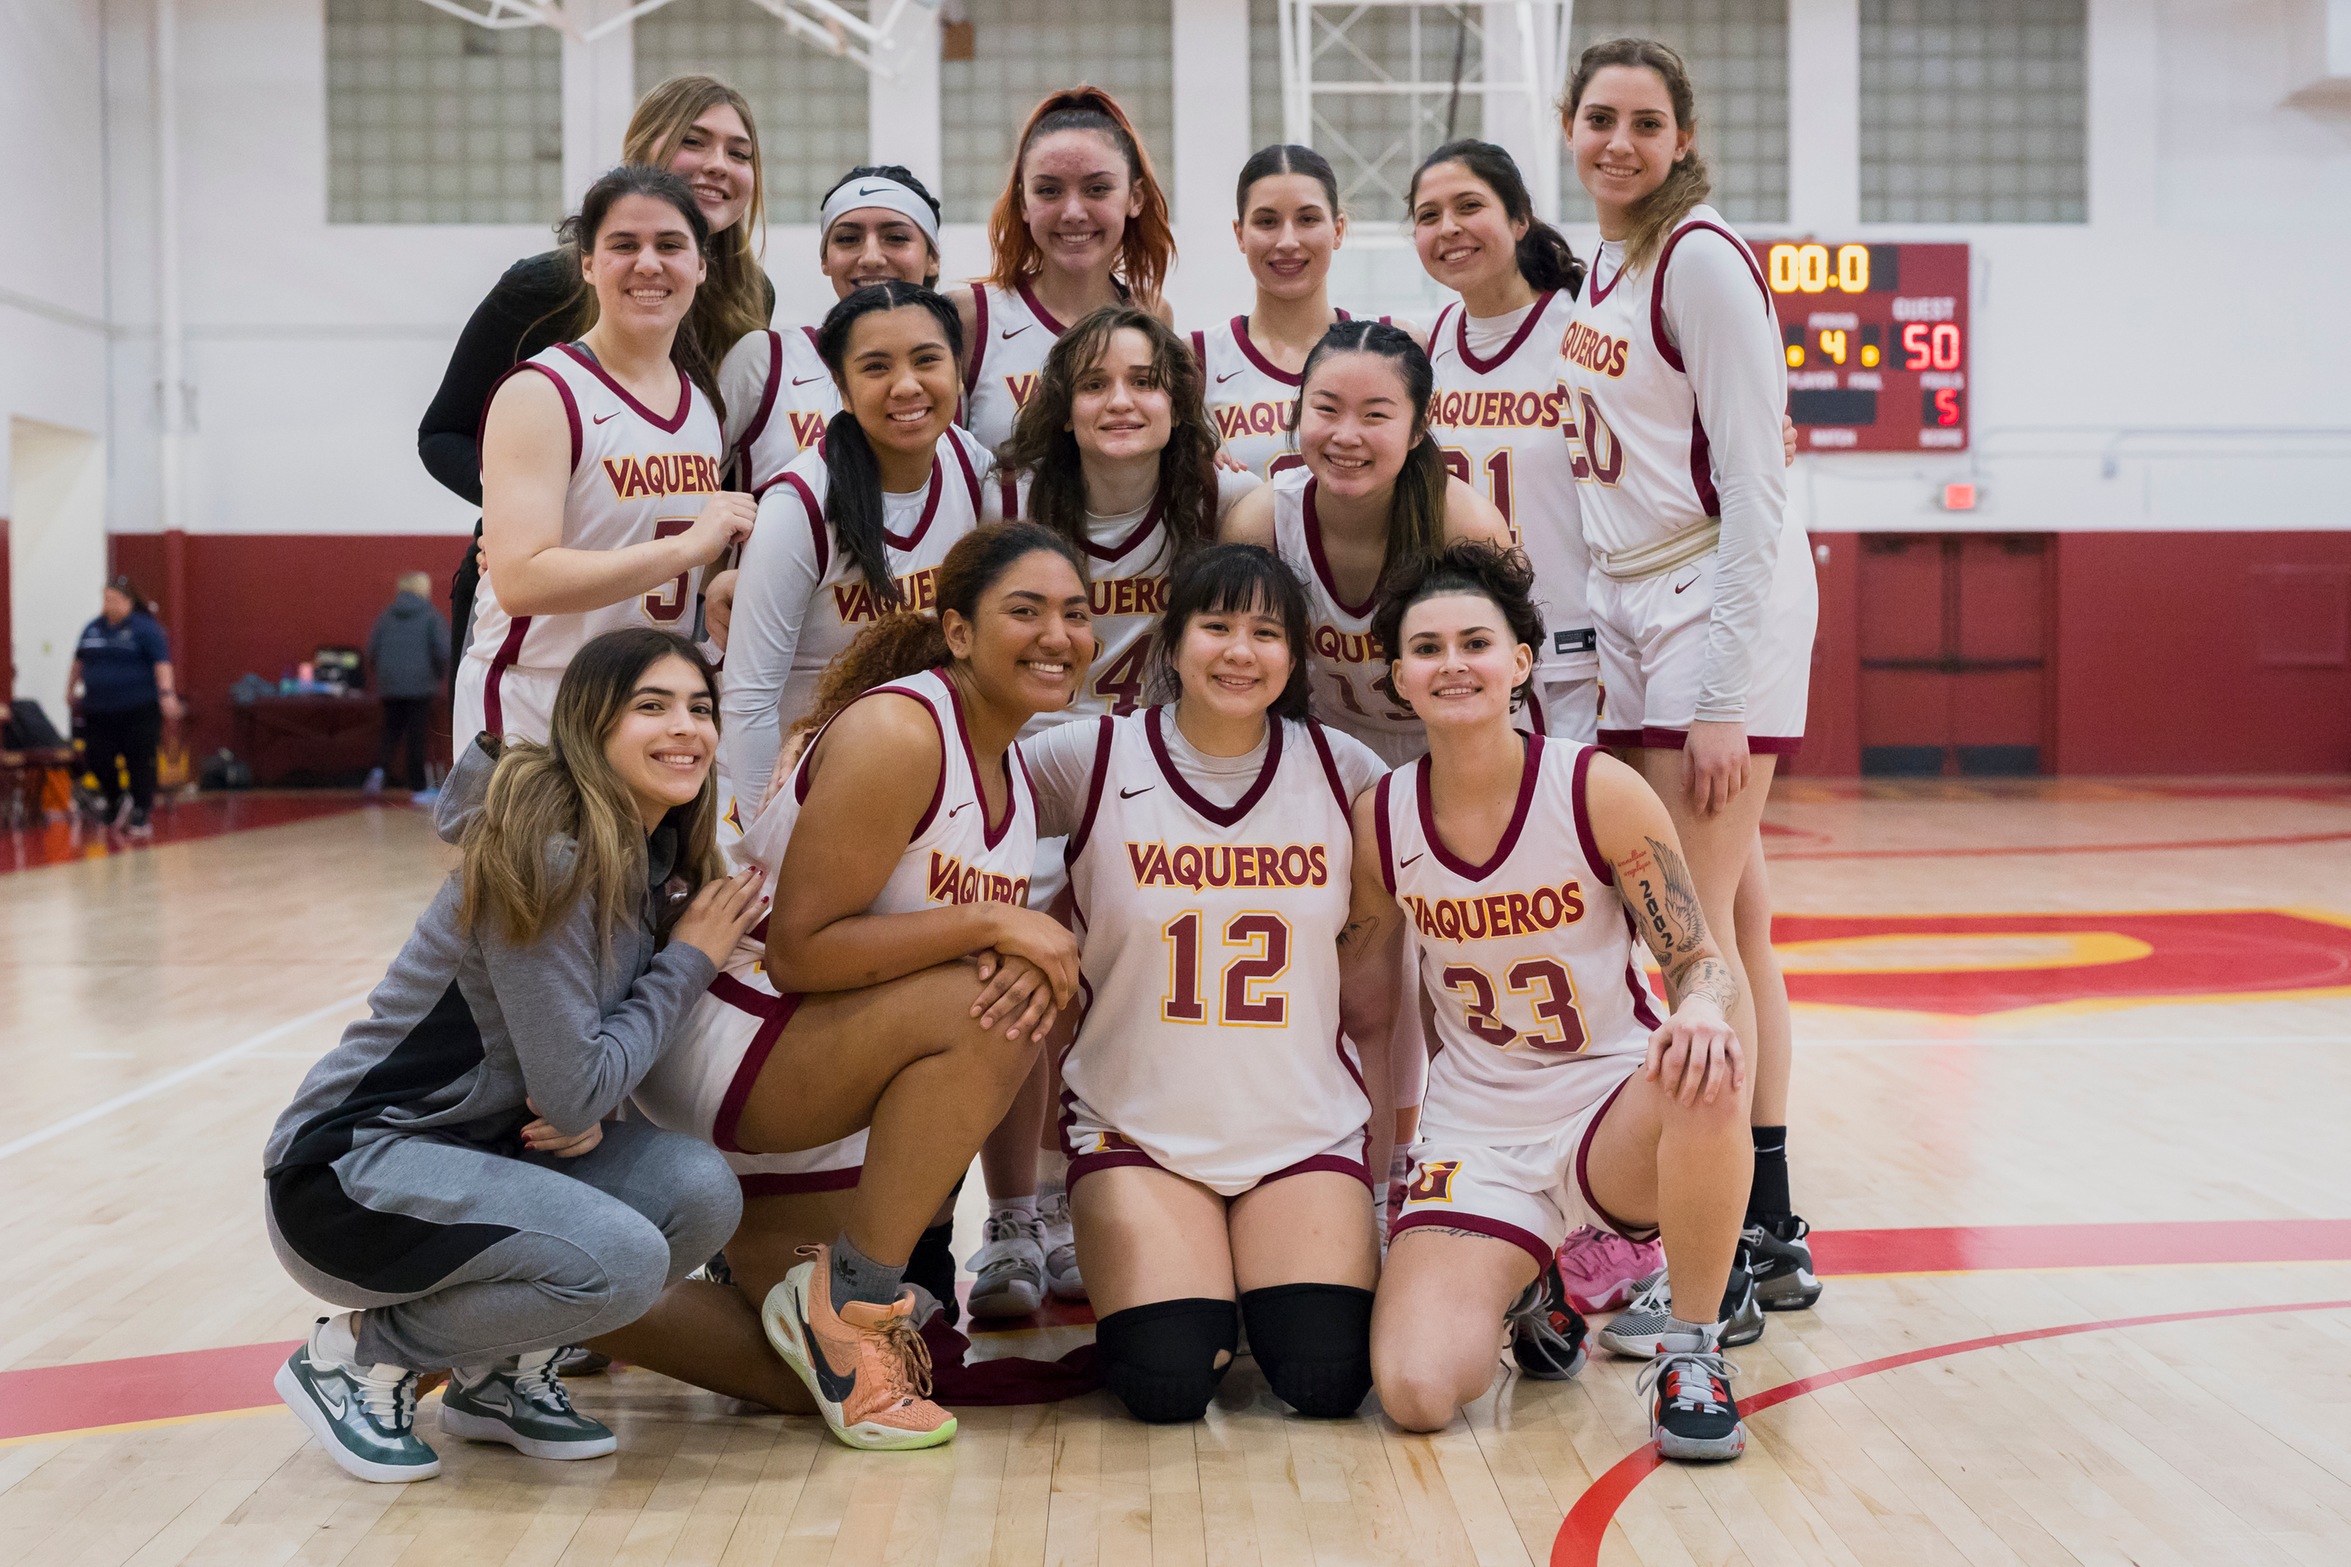 GCC Women's Basketball beats Allan Hancock College 55-50 in So. Cal Regional Playoffs Feb. 25; faces undefeated Palomar College March 4